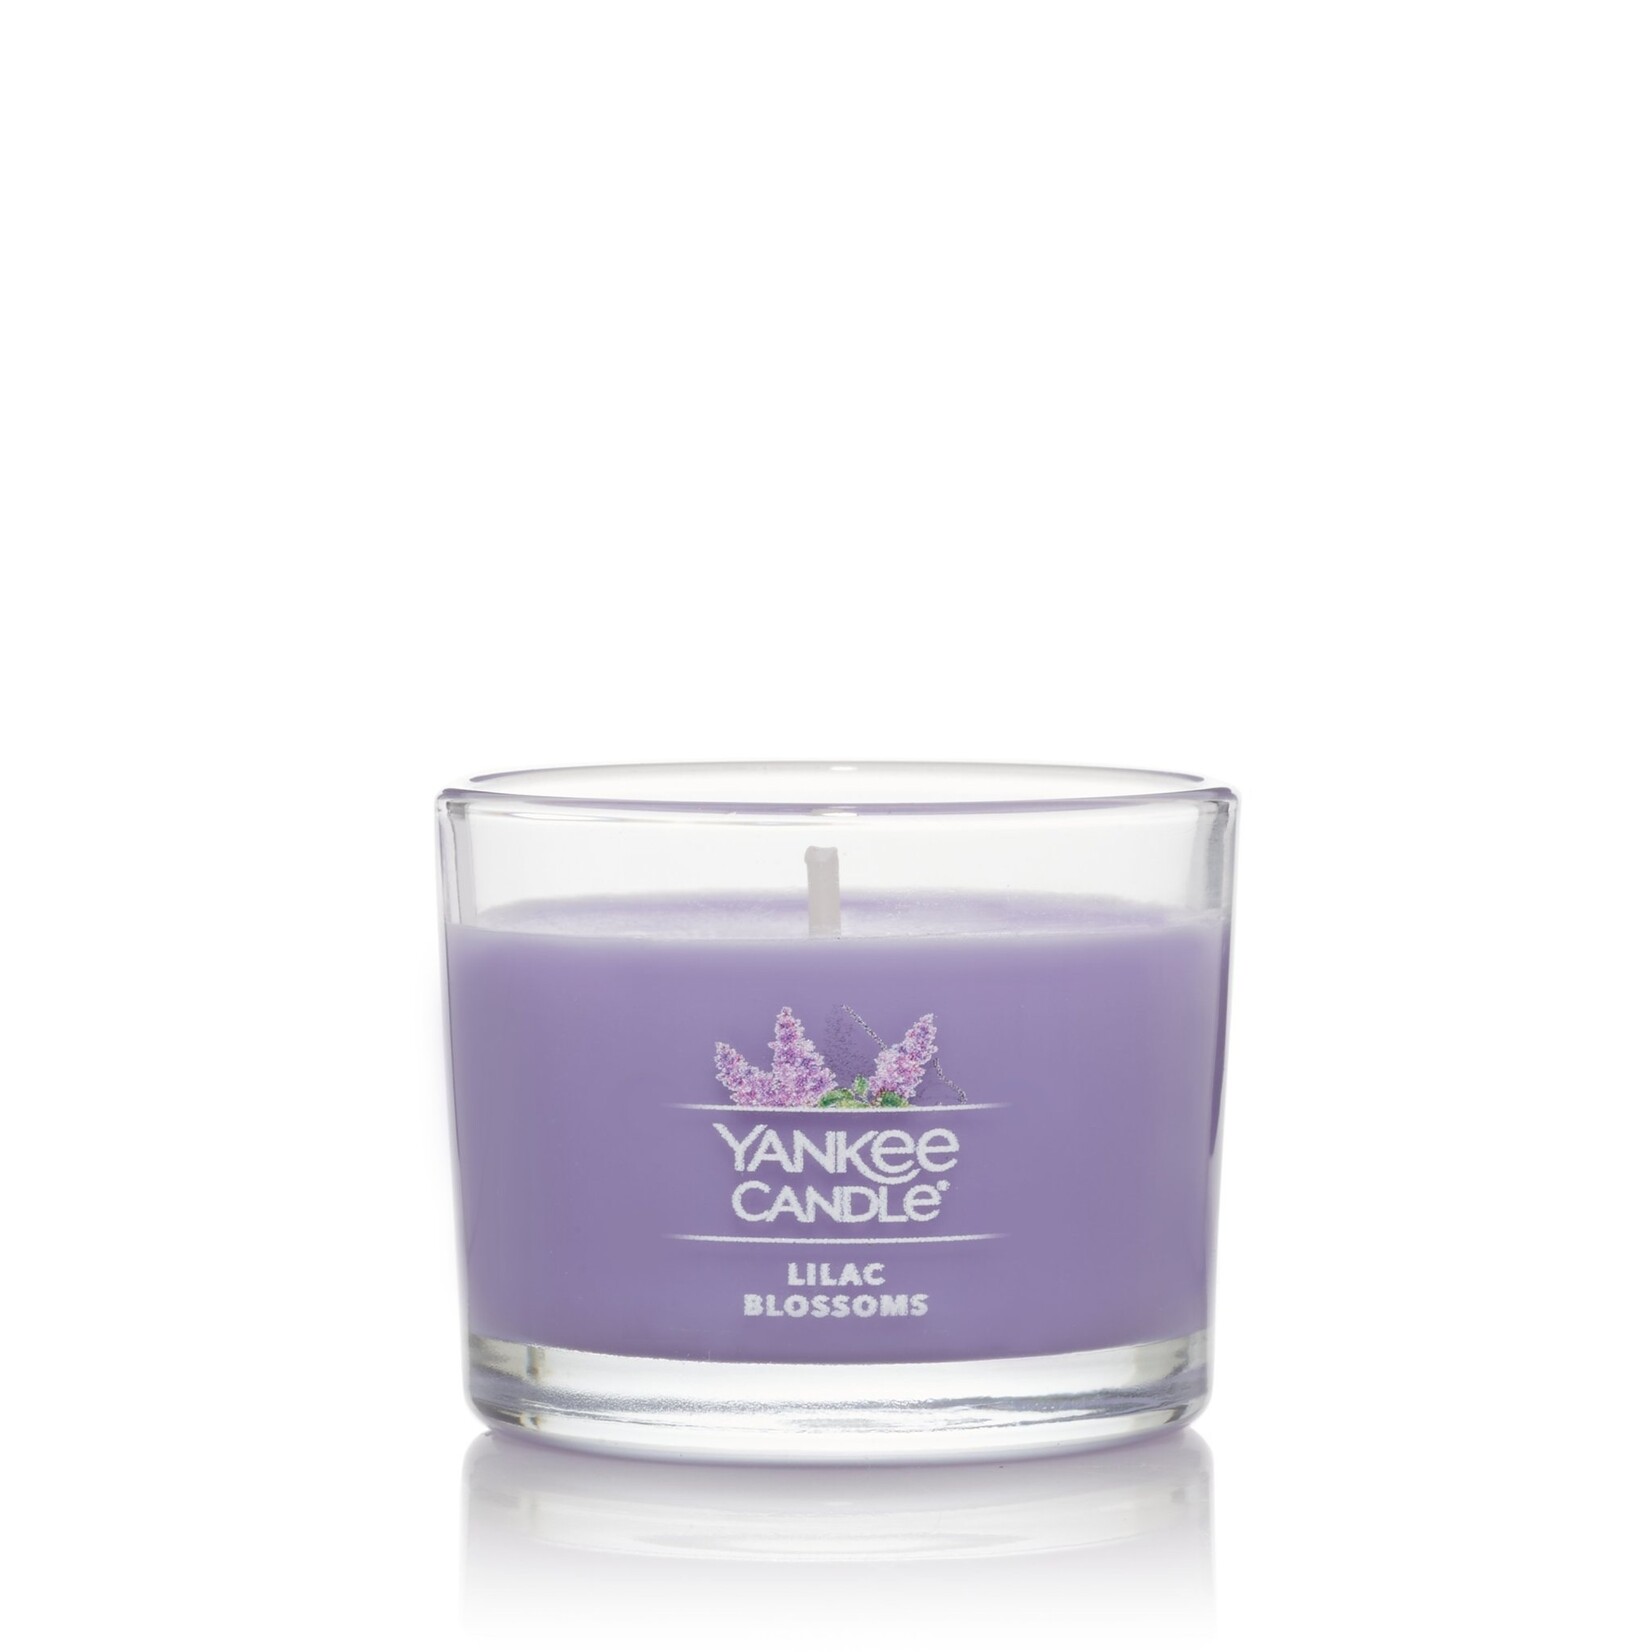 Yankee Candles Yankee Candles Lilac Blossoms 1.3 oz | 1 Wick